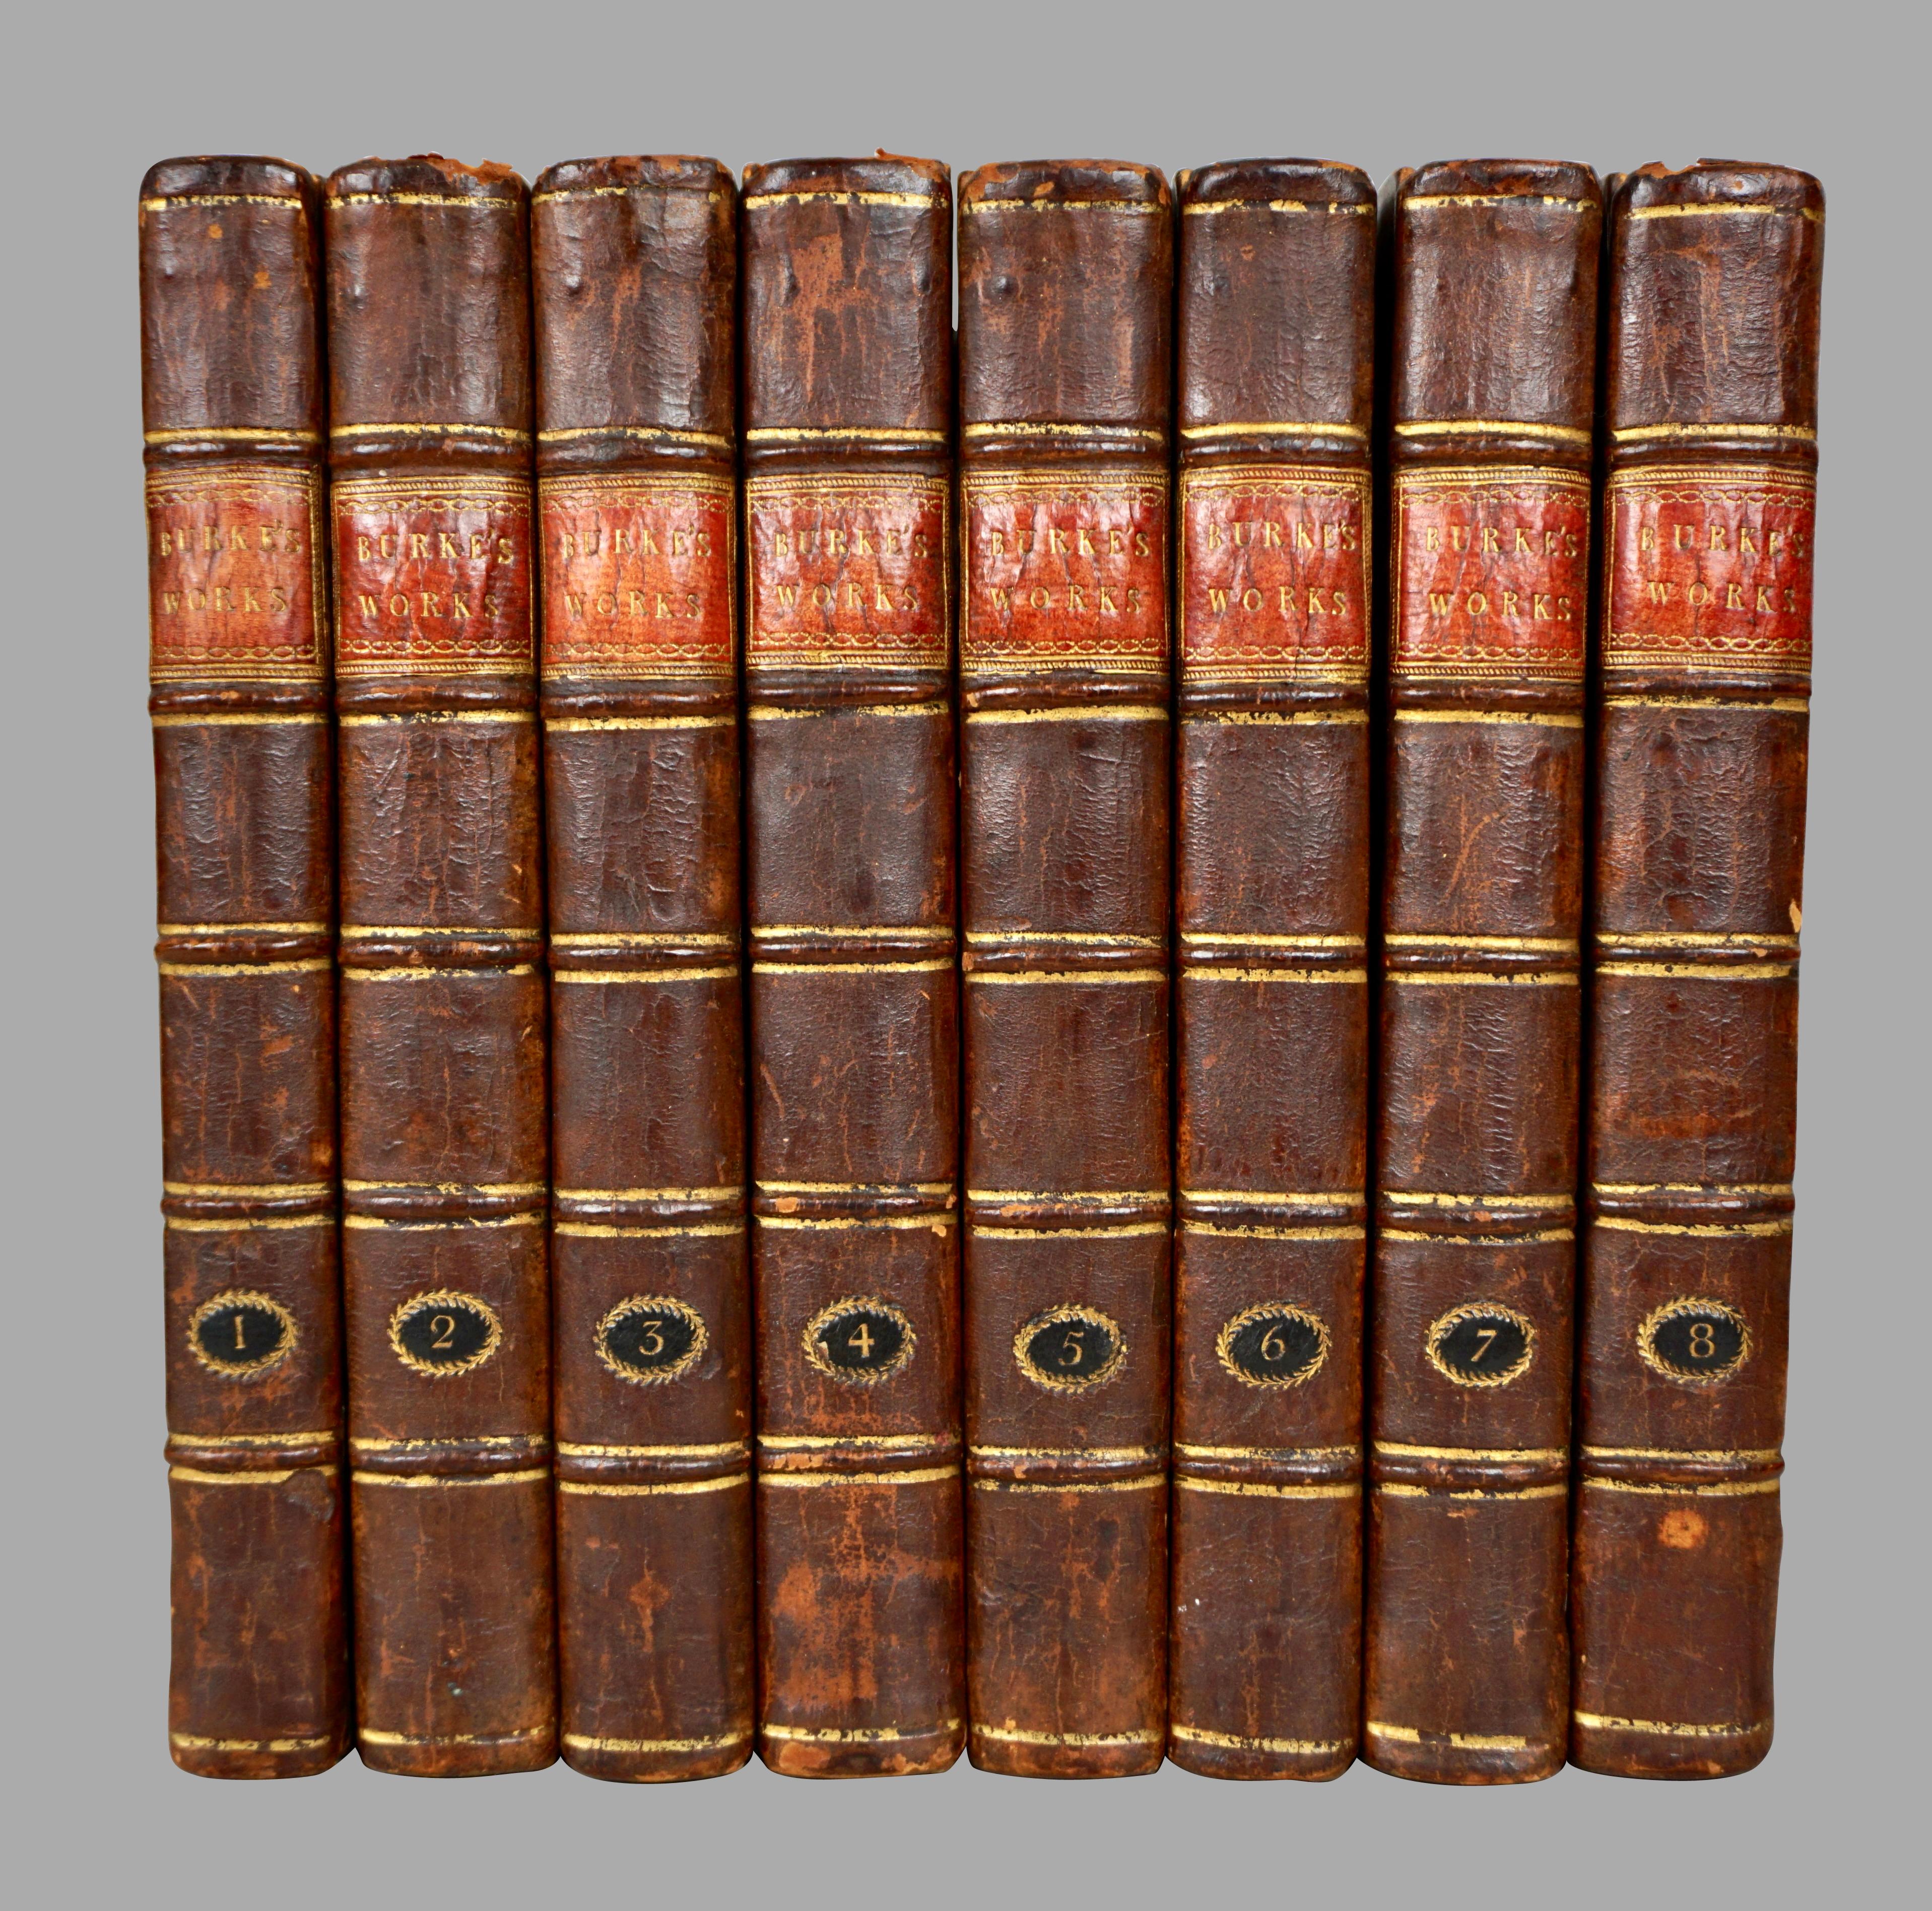 The Works of the Right Honorable Edmund Burke in 8 volumes published for F.C. and J. Rivington, St. Paul's Yard, England by Luke Hanfard and Sons, near Lincoln's-Inn Fields. This attractive 8 volume set is bound in full leather with raised spines.